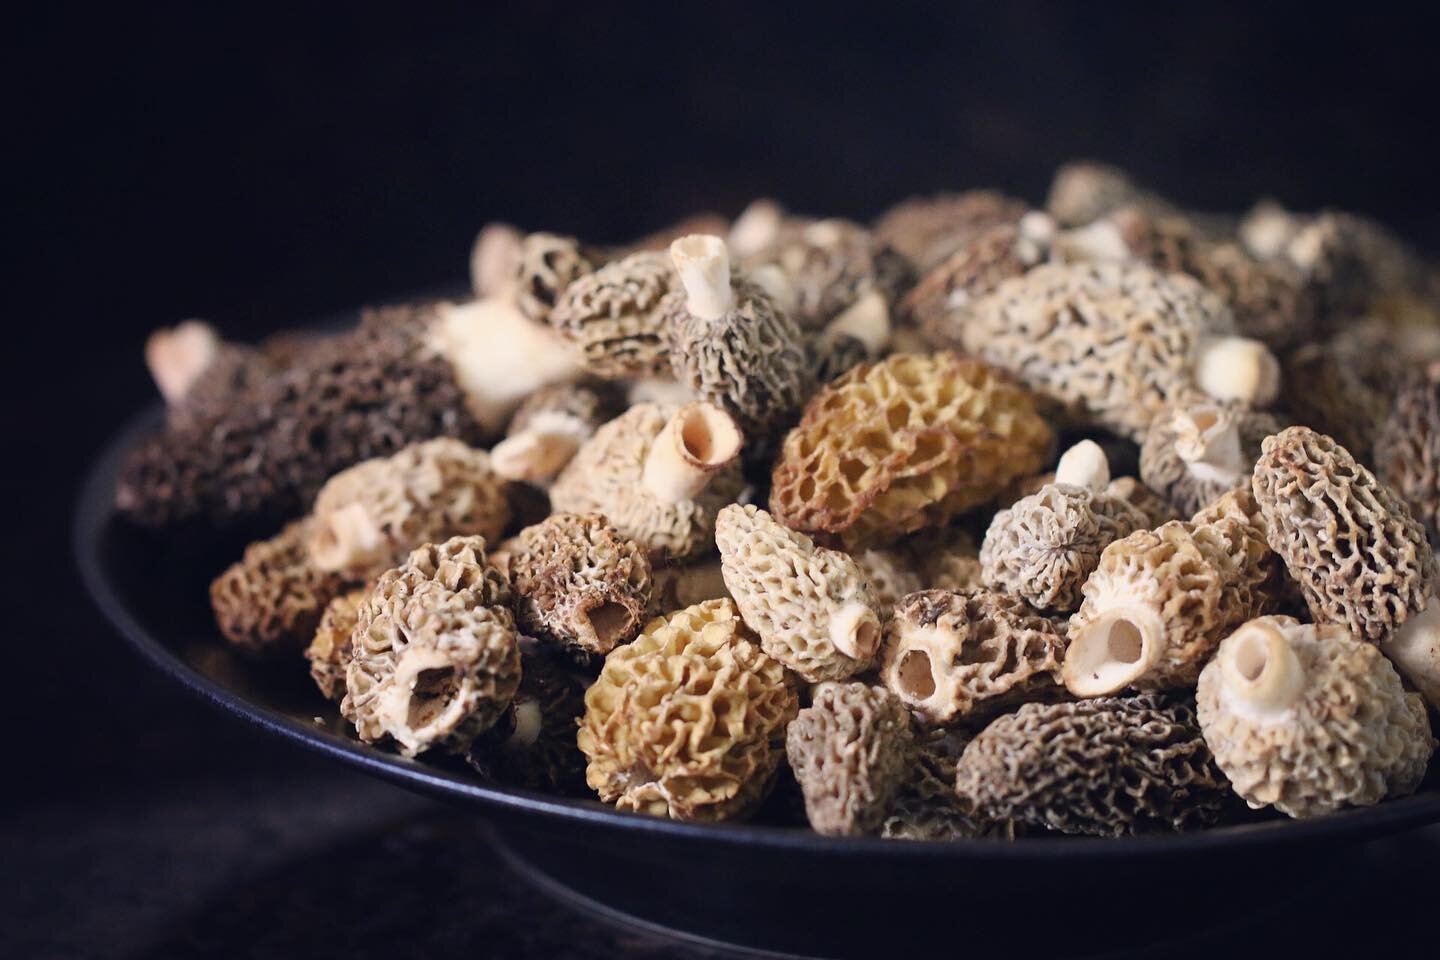 Folks, now is the time. They&rsquo;re back, and this will be the peak week for Green Mountain morels. Just how good it will be - whether merely good or truly epic - we shall soon find out. ✨ Check out the link in our profile to read Ari&rsquo;s lates